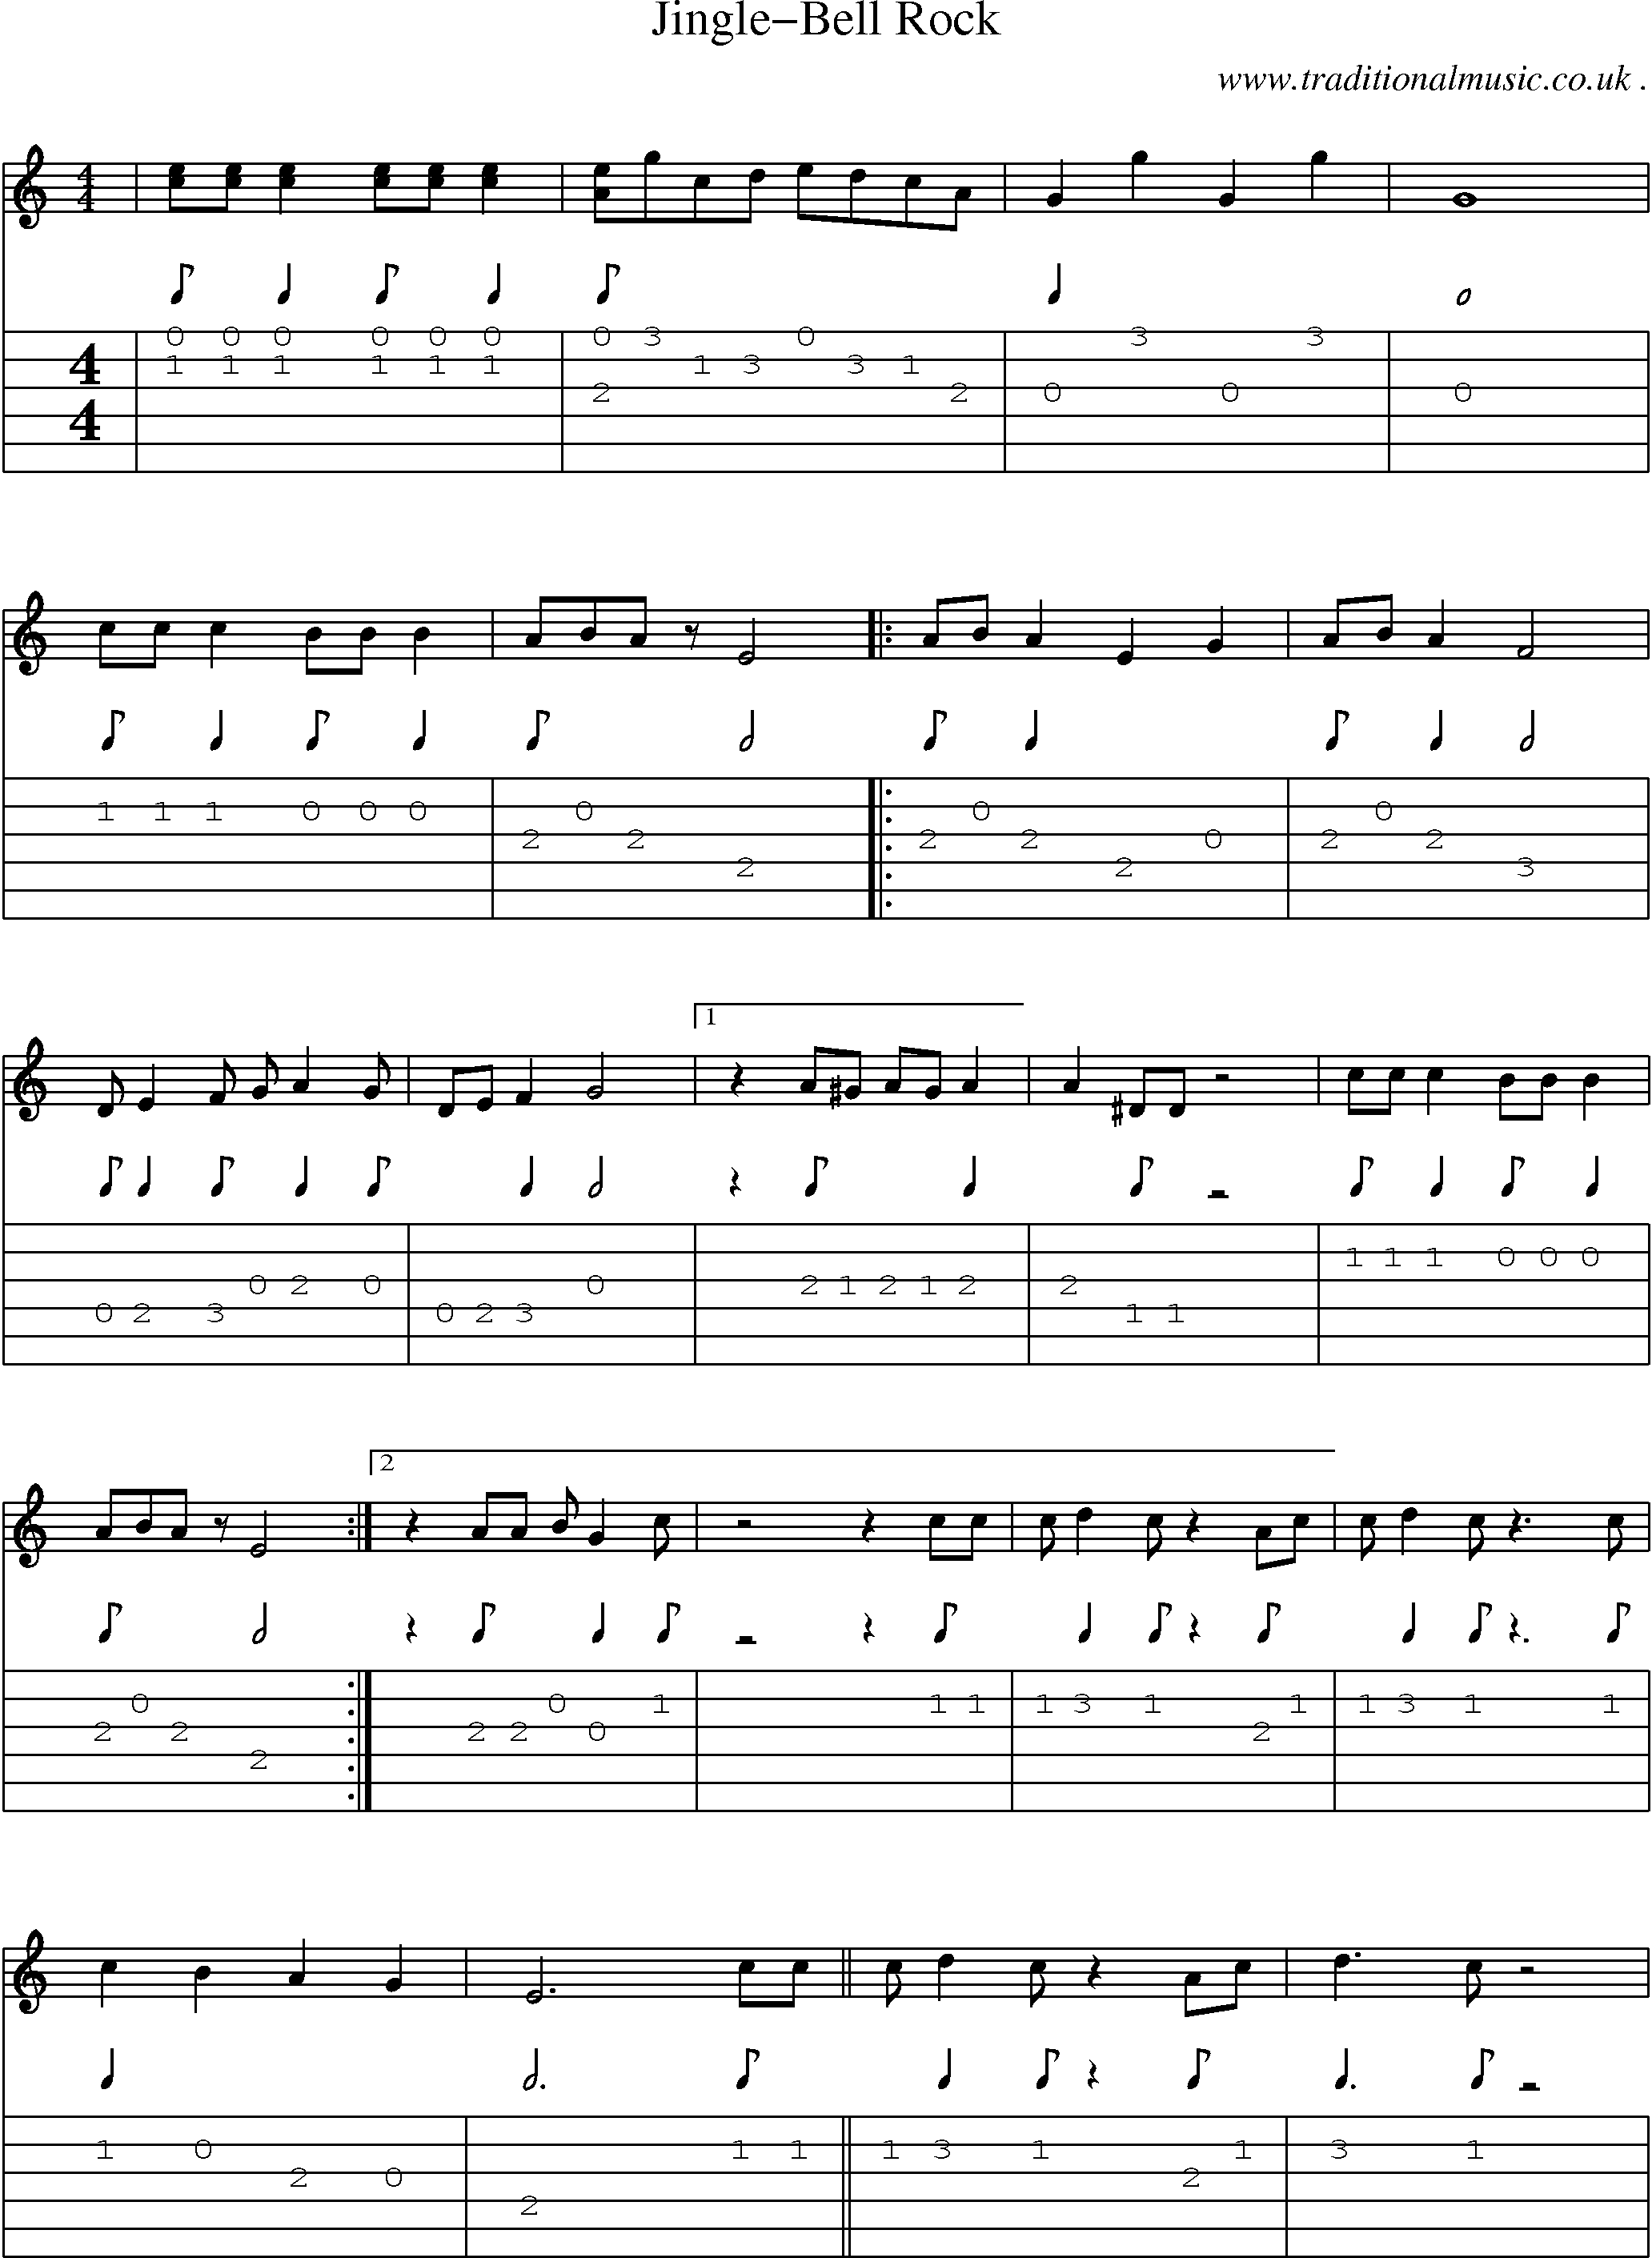 Music Score and Guitar Tabs for Jingle-bell Rock